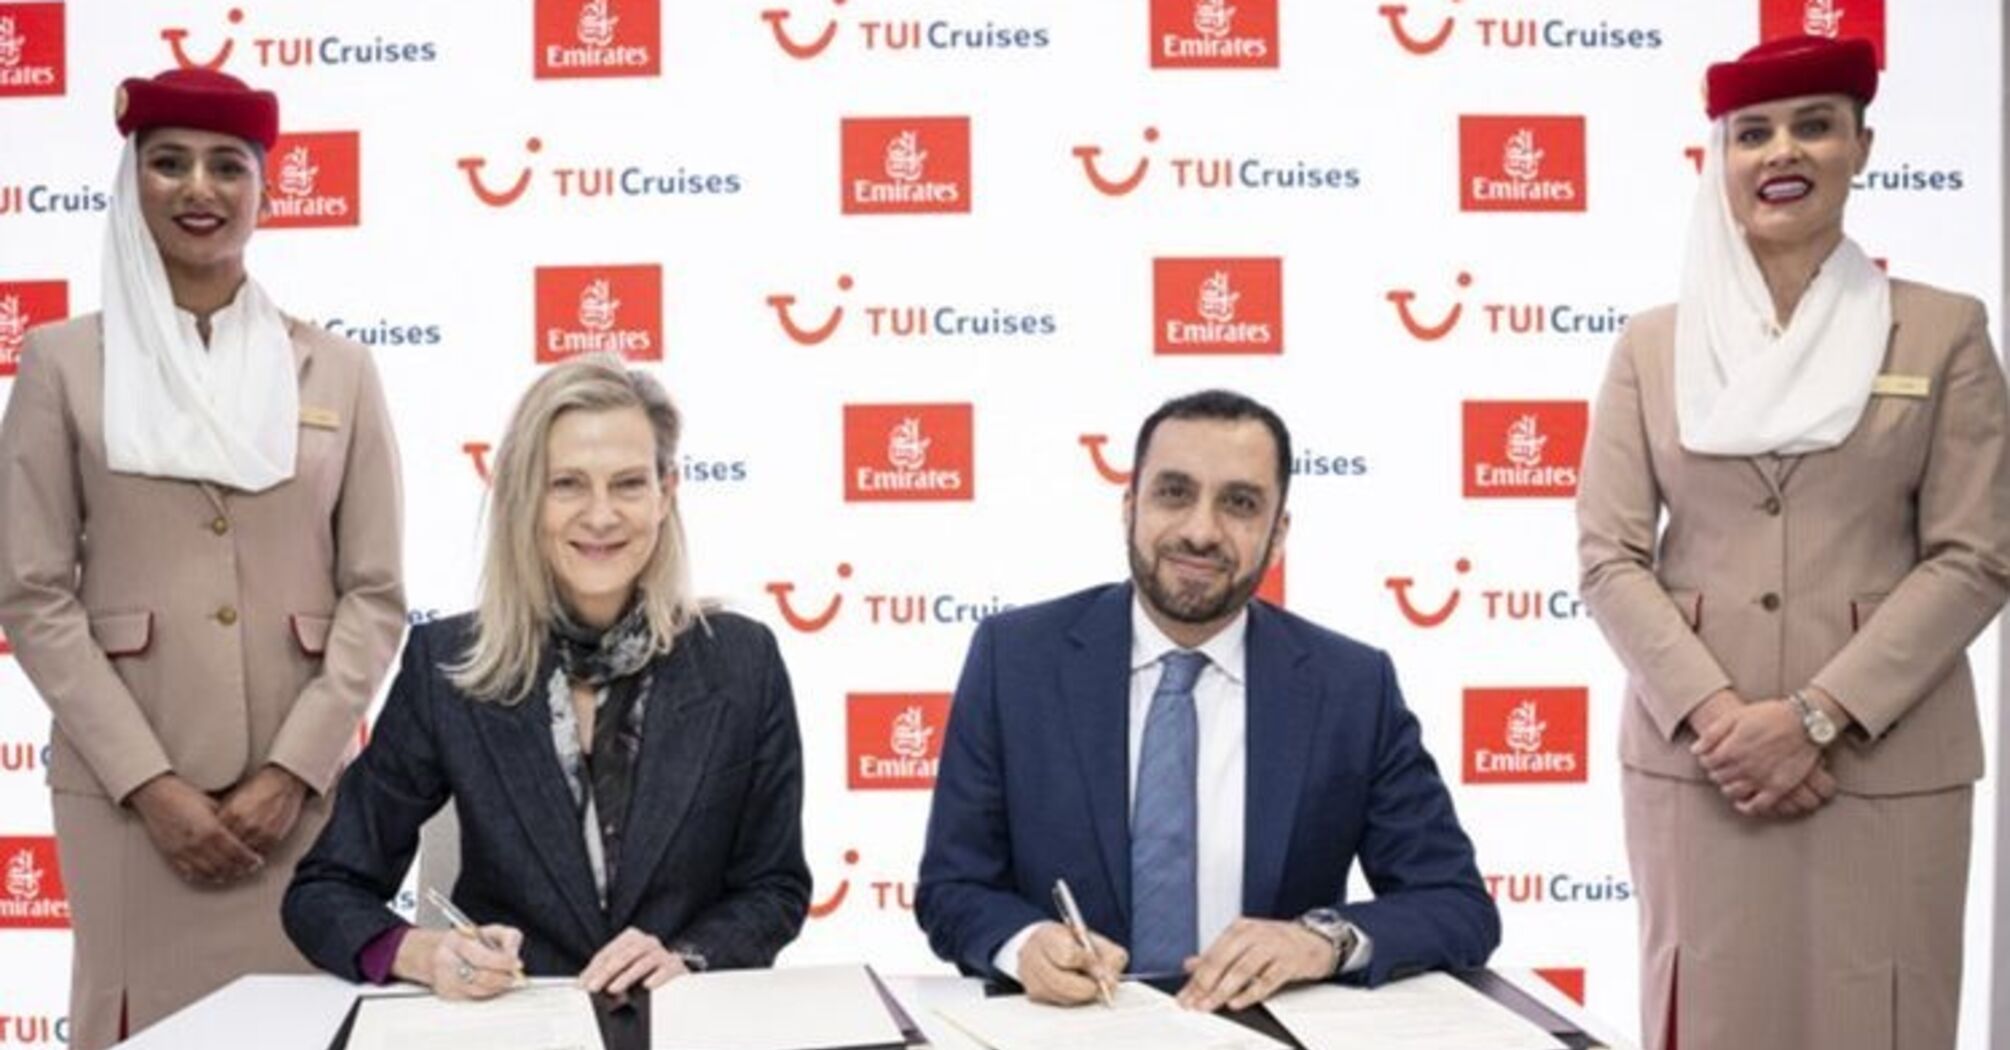 Emirates and TUI Cruises are expanding their partnership for the next two seasons